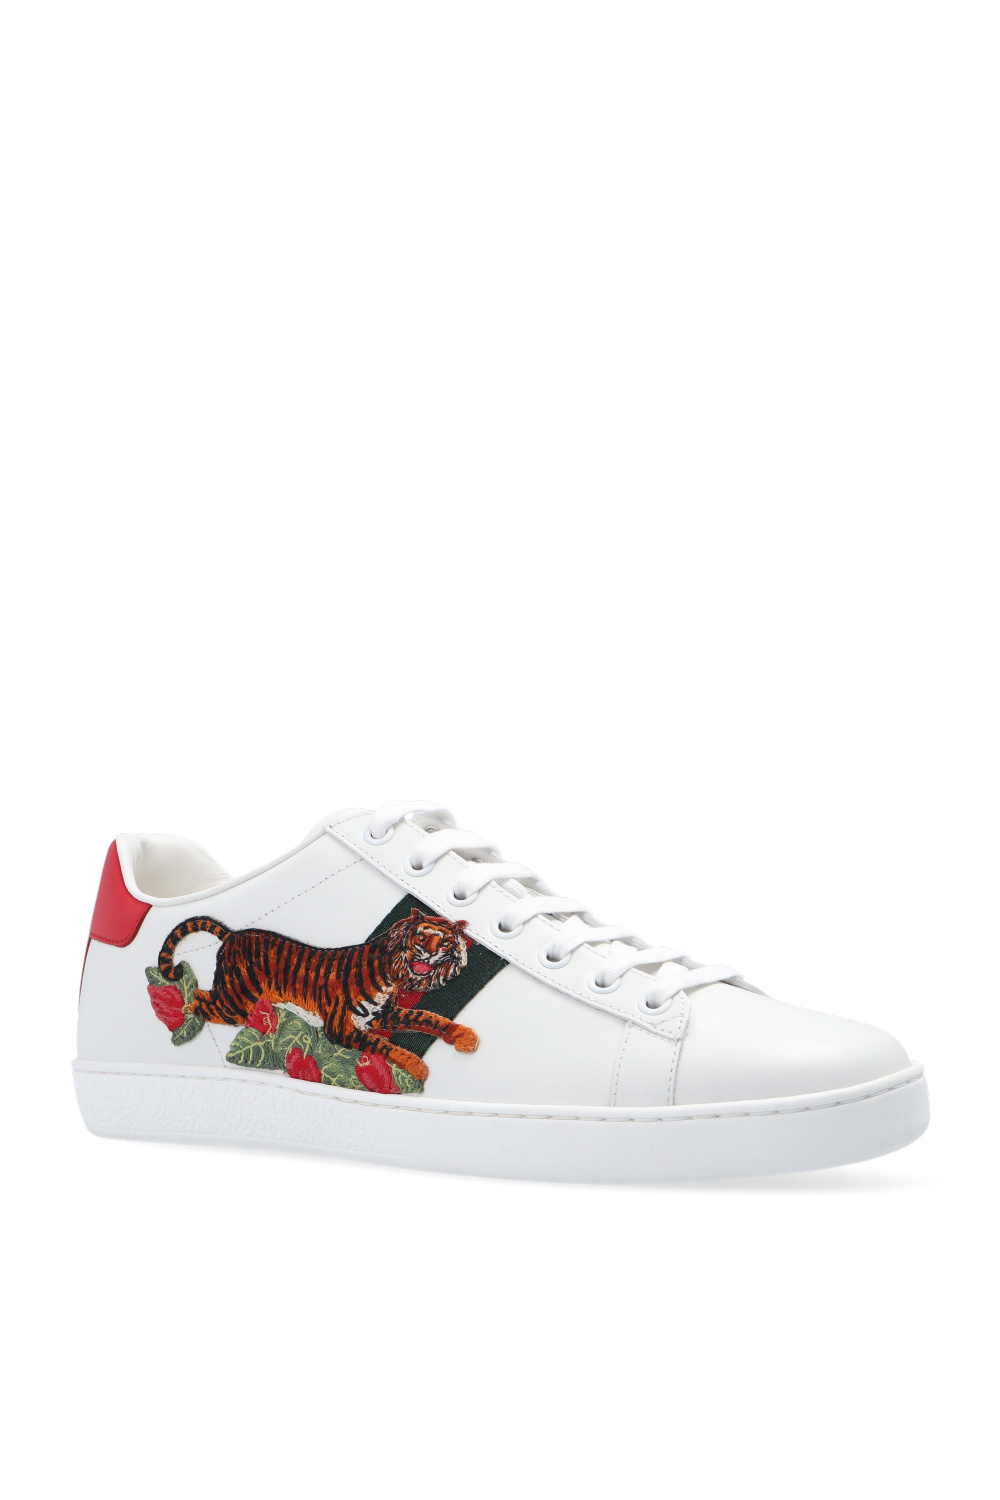 Gucci Sneakers the 'Gucci Tiger' collection | Women's Vitkac